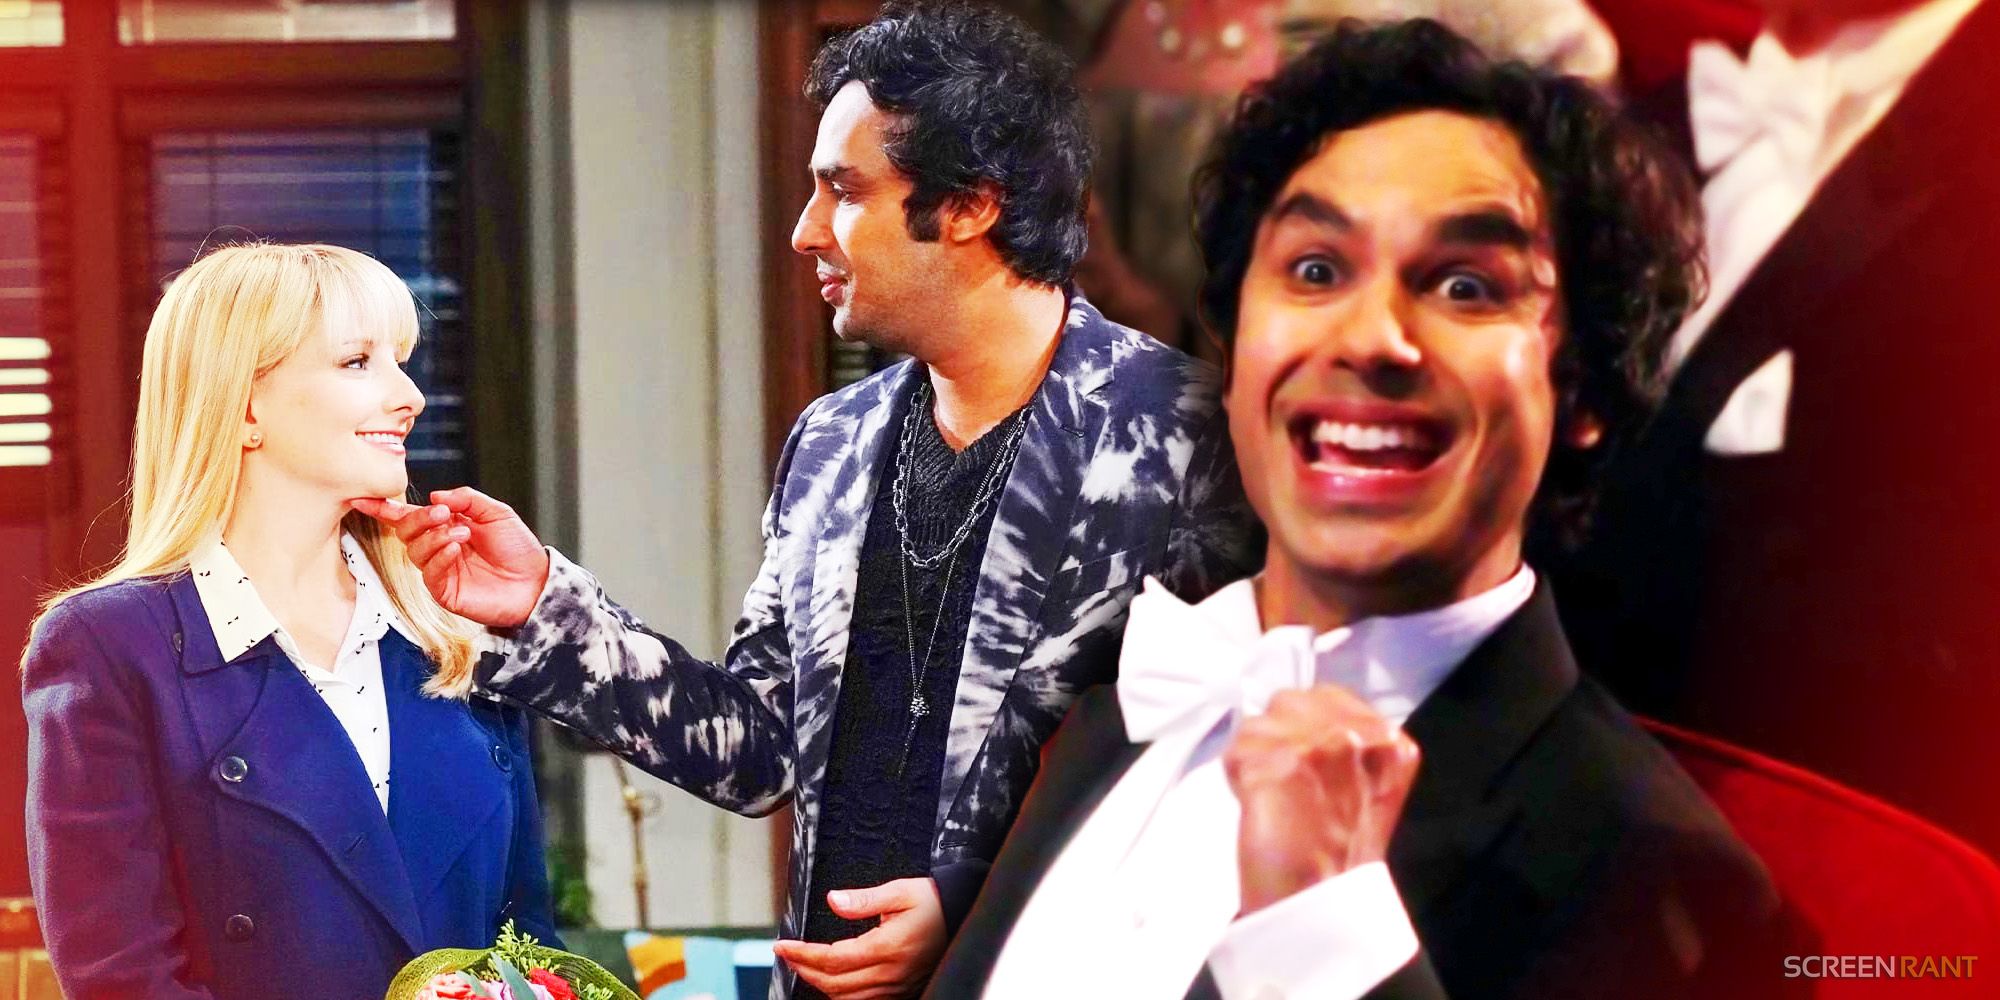 Kunal Nayyar in Night Court season 2 and Raj in his tux during TBBT Finale’s Nobel Prize ceremony